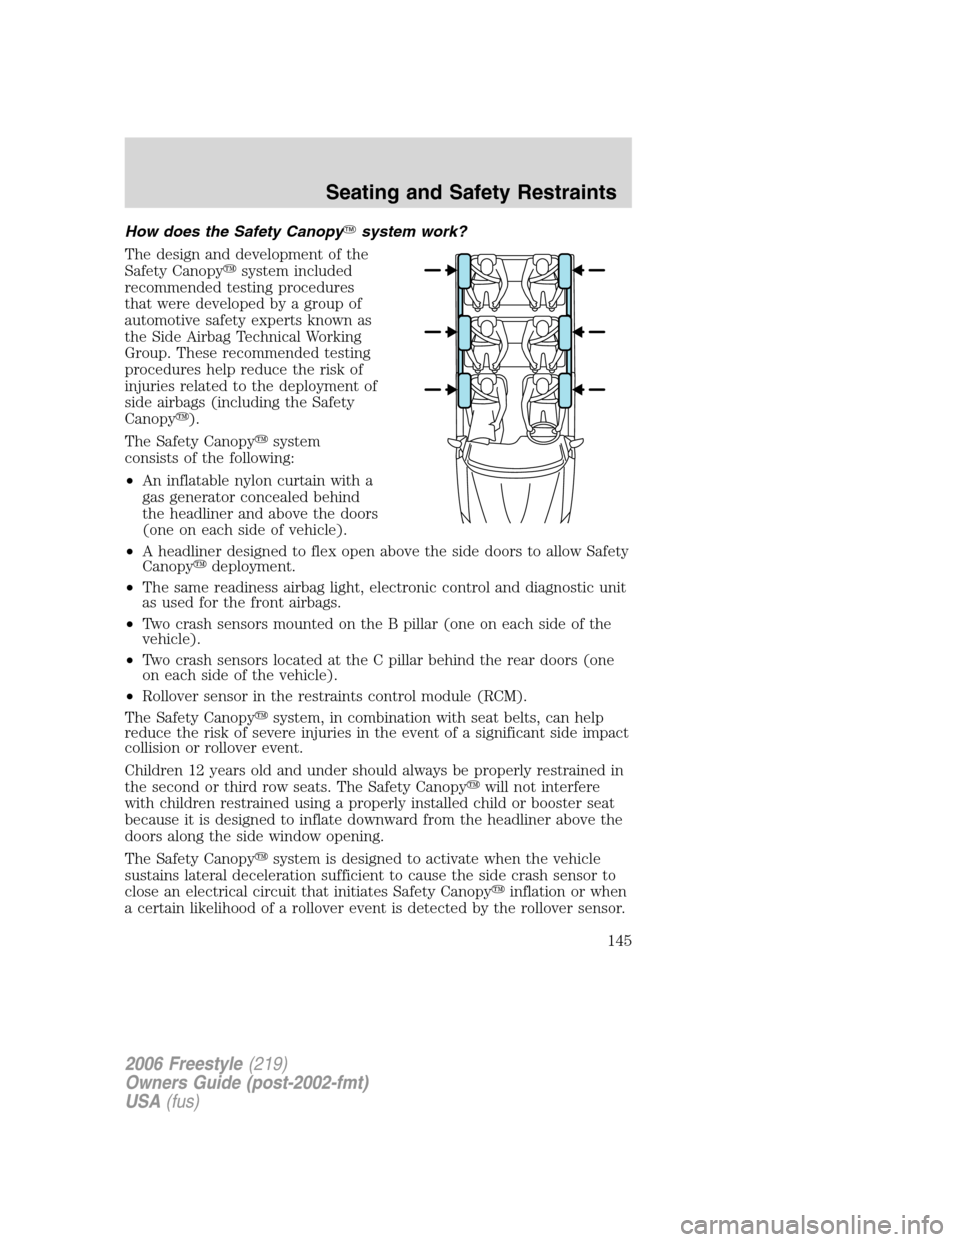 FORD FREESTYLE 2006 1.G User Guide How does the Safety Canopysystem work?
The design and development of the
Safety Canopysystem included
recommended testing procedures
that were developed by a group of
automotive safety experts known